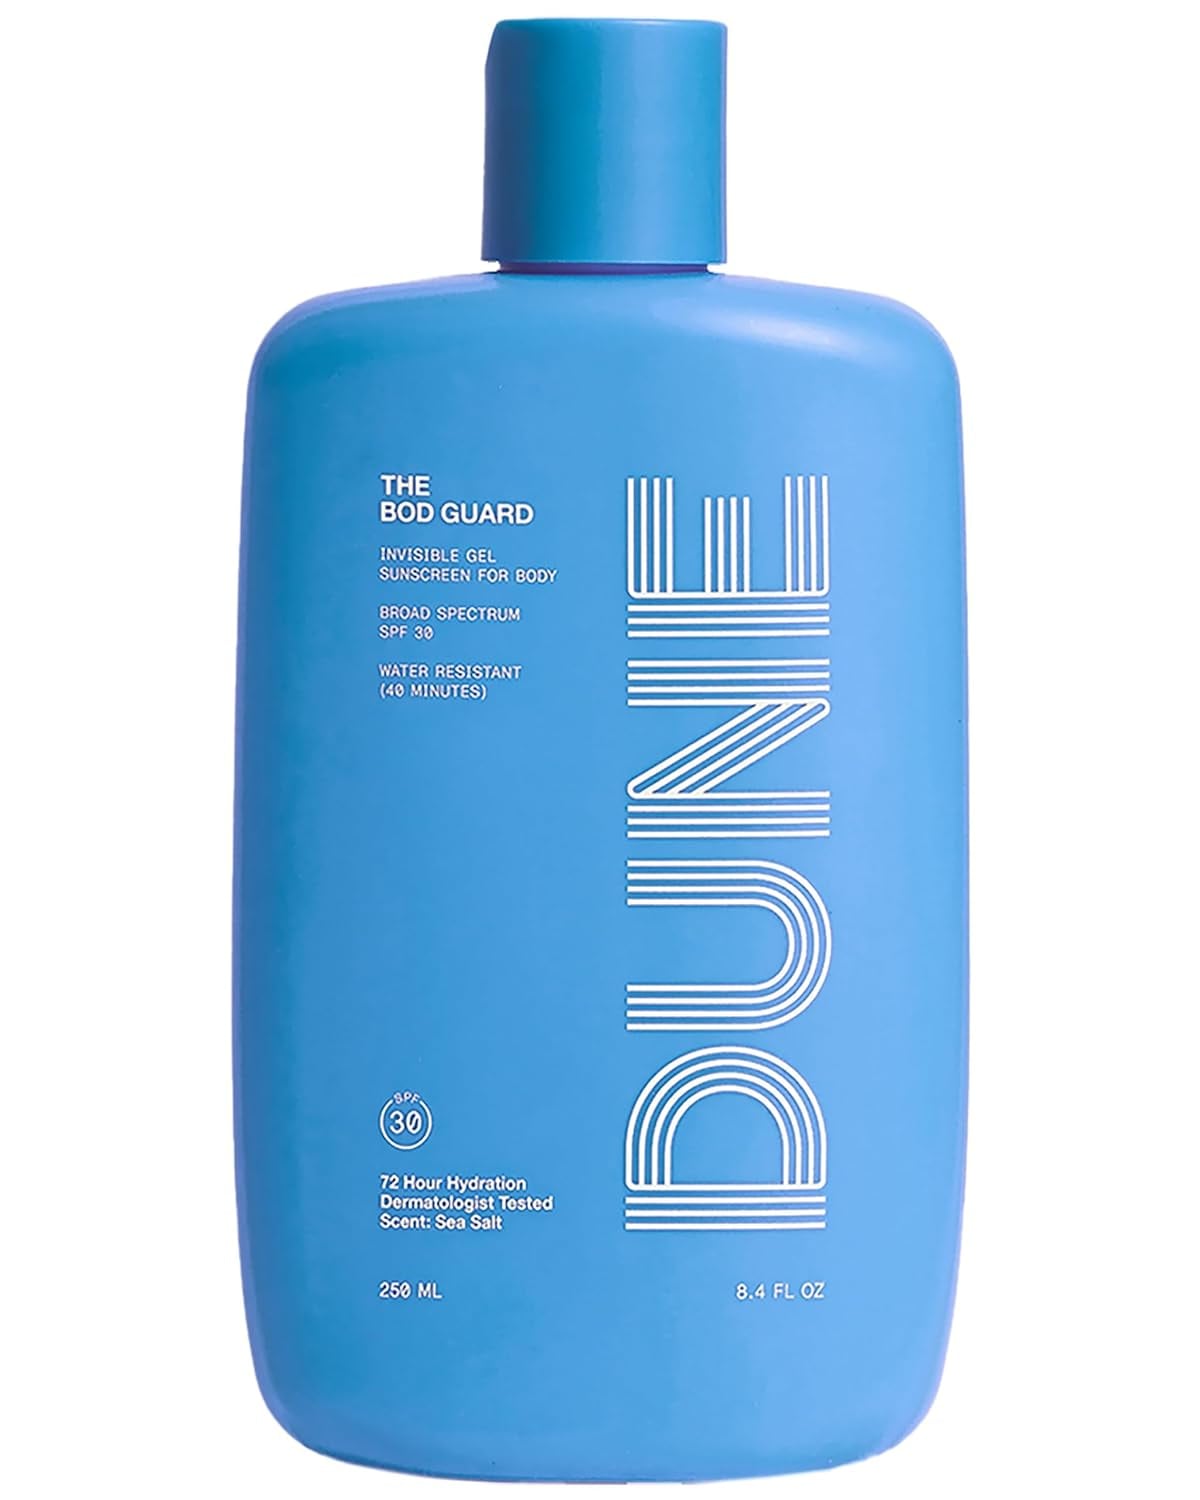 <p><a href="https://www.amazon.com/DUNE-Suncare-Bod-Guard-Award-Winning/dp/B09WRYKL1M/">BUY NOW</a></p><p>$25</p><p><a href="https://www.amazon.com/DUNE-Suncare-Bod-Guard-Award-Winning/dp/B09WRYKL1M/" class="ga-track"><strong>The Bod Guard - Award-Winning Gel Body Sunscreen</strong></a> ($25) </p><p>This clear gel sunscreen's texture is revolutionary - and no, that's not an understatement. It's quick-drying, doesn't leave a white cast, and isn't oily or greasy in the least. Trust us: It'll be worth packing in your checked baggage. Learn more by reading our <a href="https://www.popsugar.com/beauty/dune-suncare-sunscreen-review-49219112" class="ga-track">Bod Guard Gel Body Sunscreen review</a>.</p>